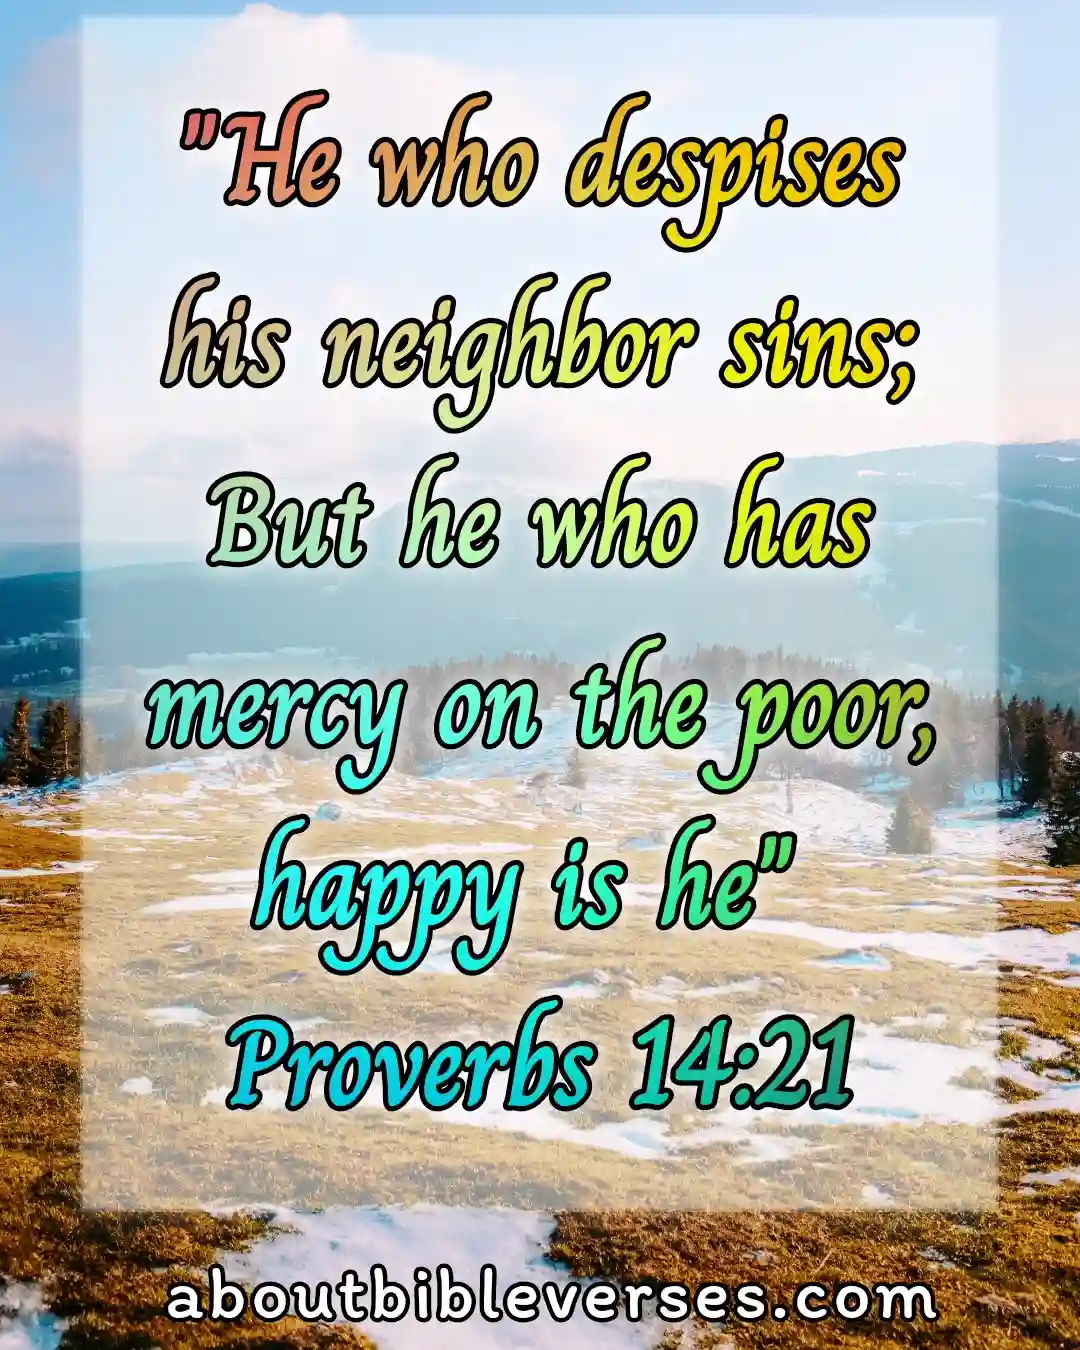 Bible verses God Is Merciful (Proverbs 14:21)